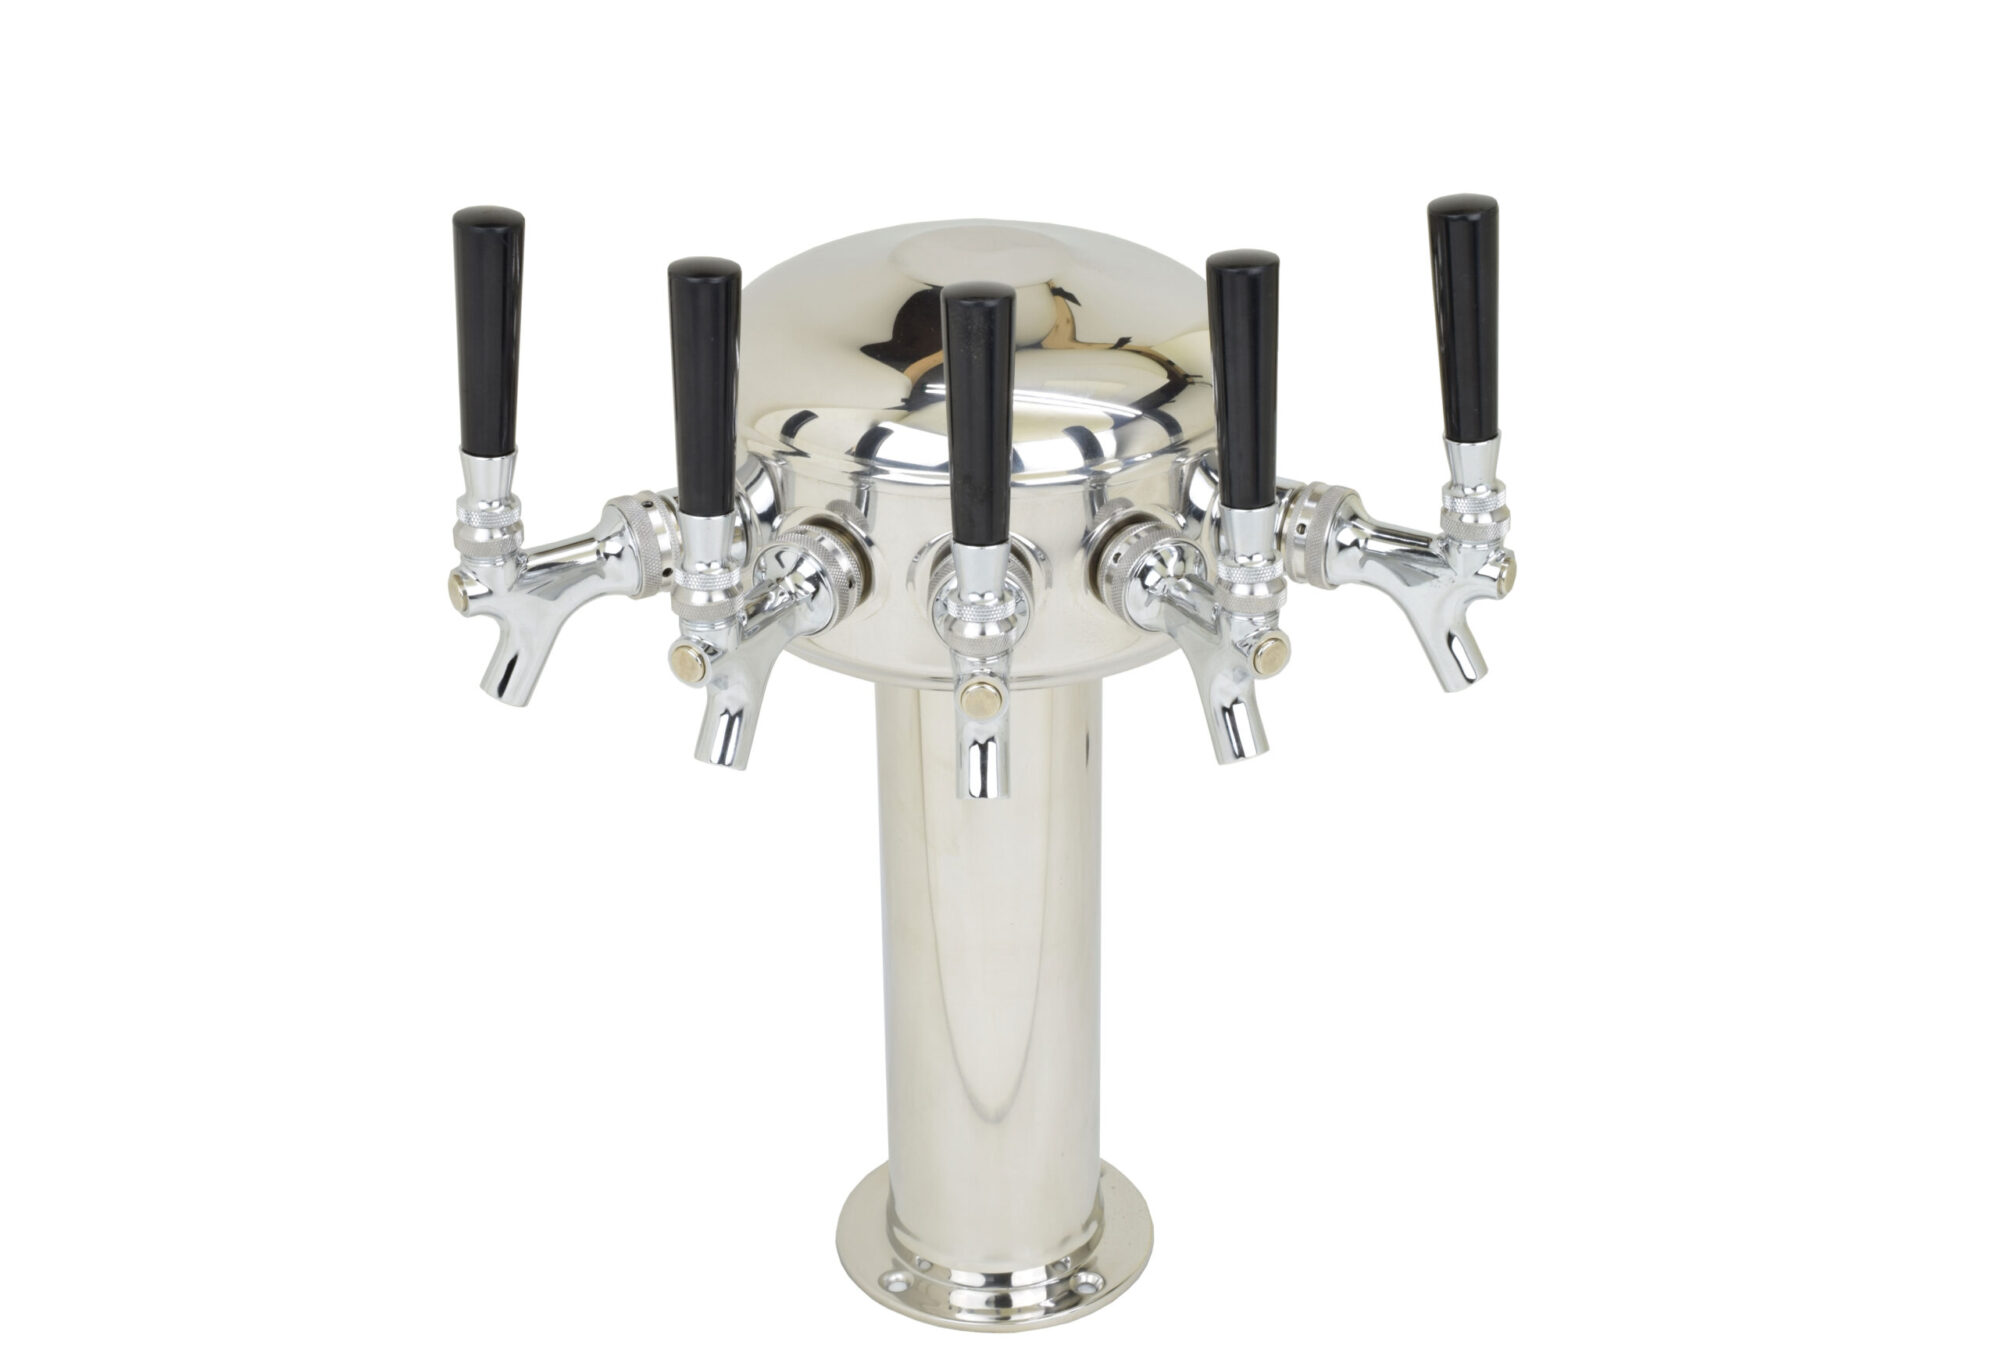 626C-5SSW Five Faucet Mini Mushroom Tower with 304 SS Faucets, Shanks and 5' of 1/4" Barrier Poly Line